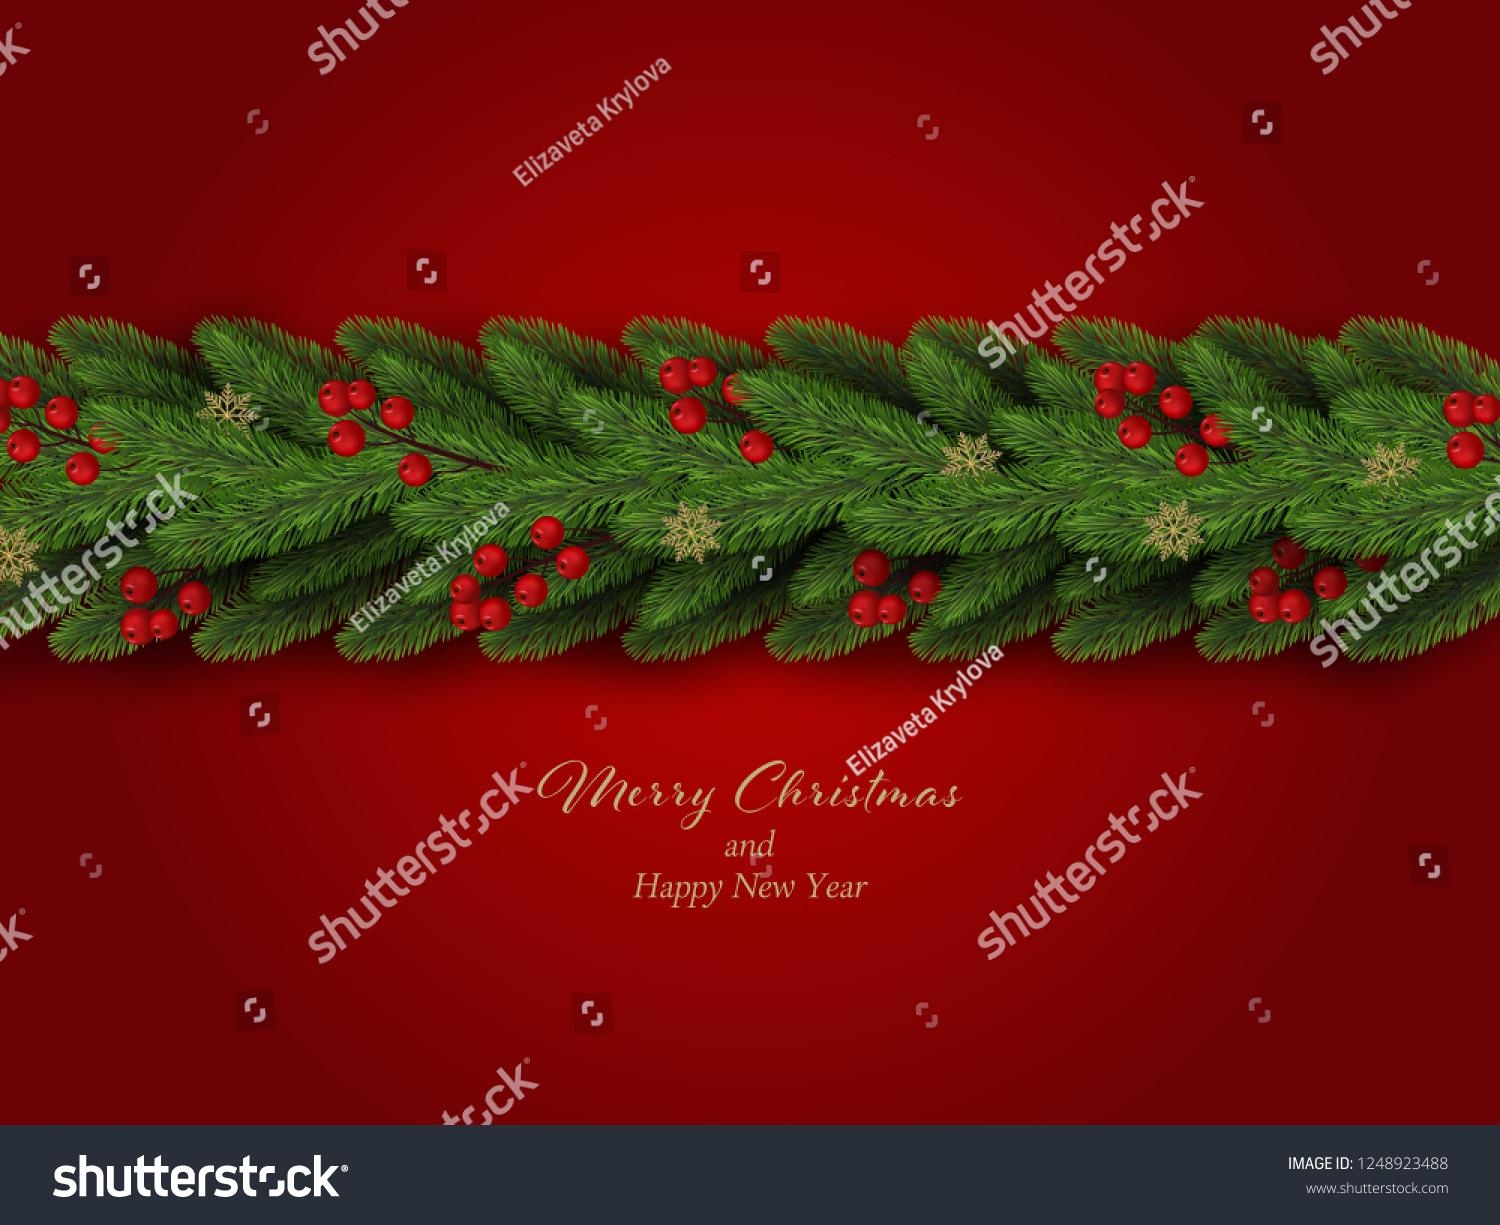 Christmas border. Winter holiday background with decorative border of realistic christmas tree branches with red berries and snowflakes. Vector illustration #1248923488